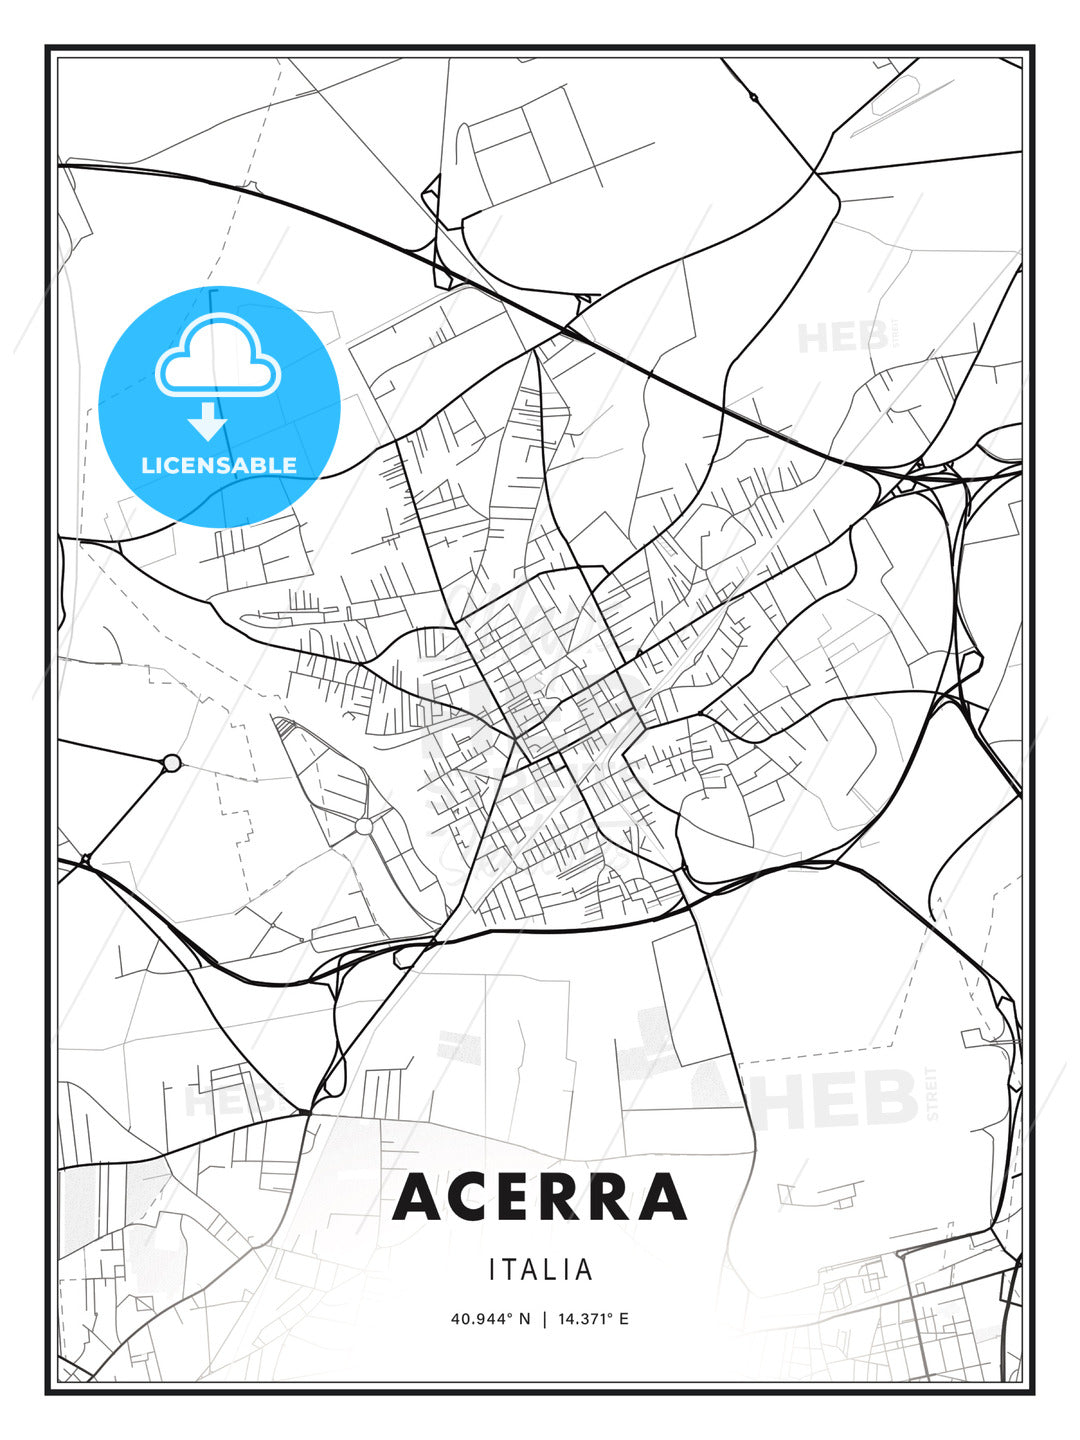 Acerra, Italy, Modern Print Template in Various Formats - HEBSTREITS Sketches